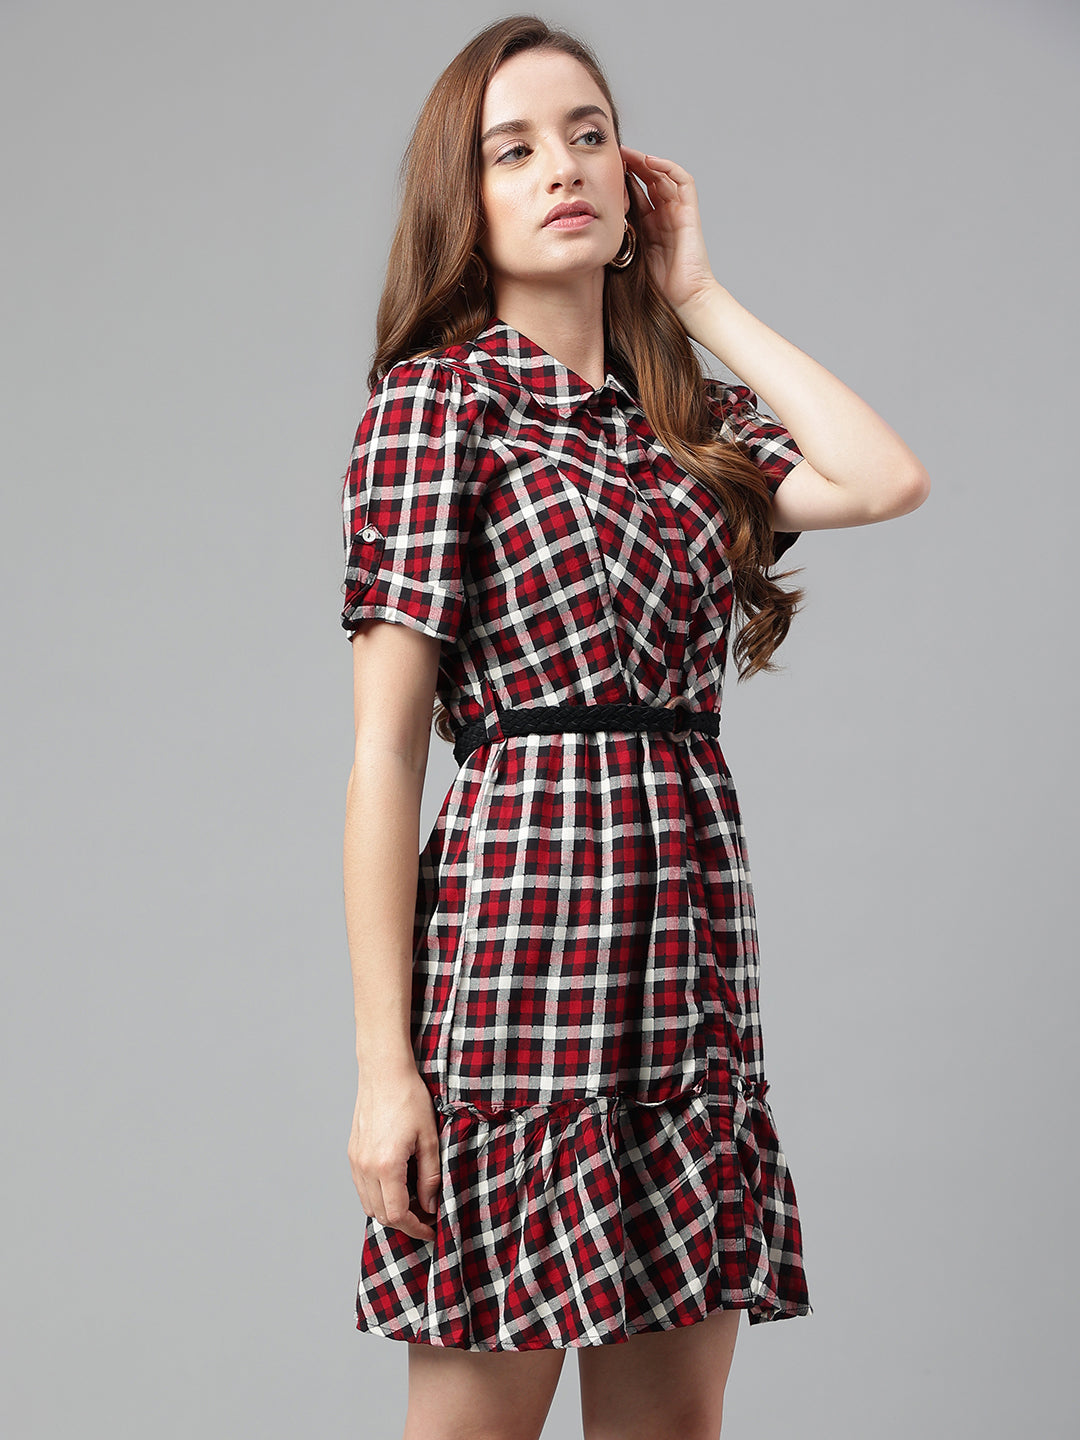 Red Short Sleeves Shirt Collar Checked Mini Dress For Casual Wear